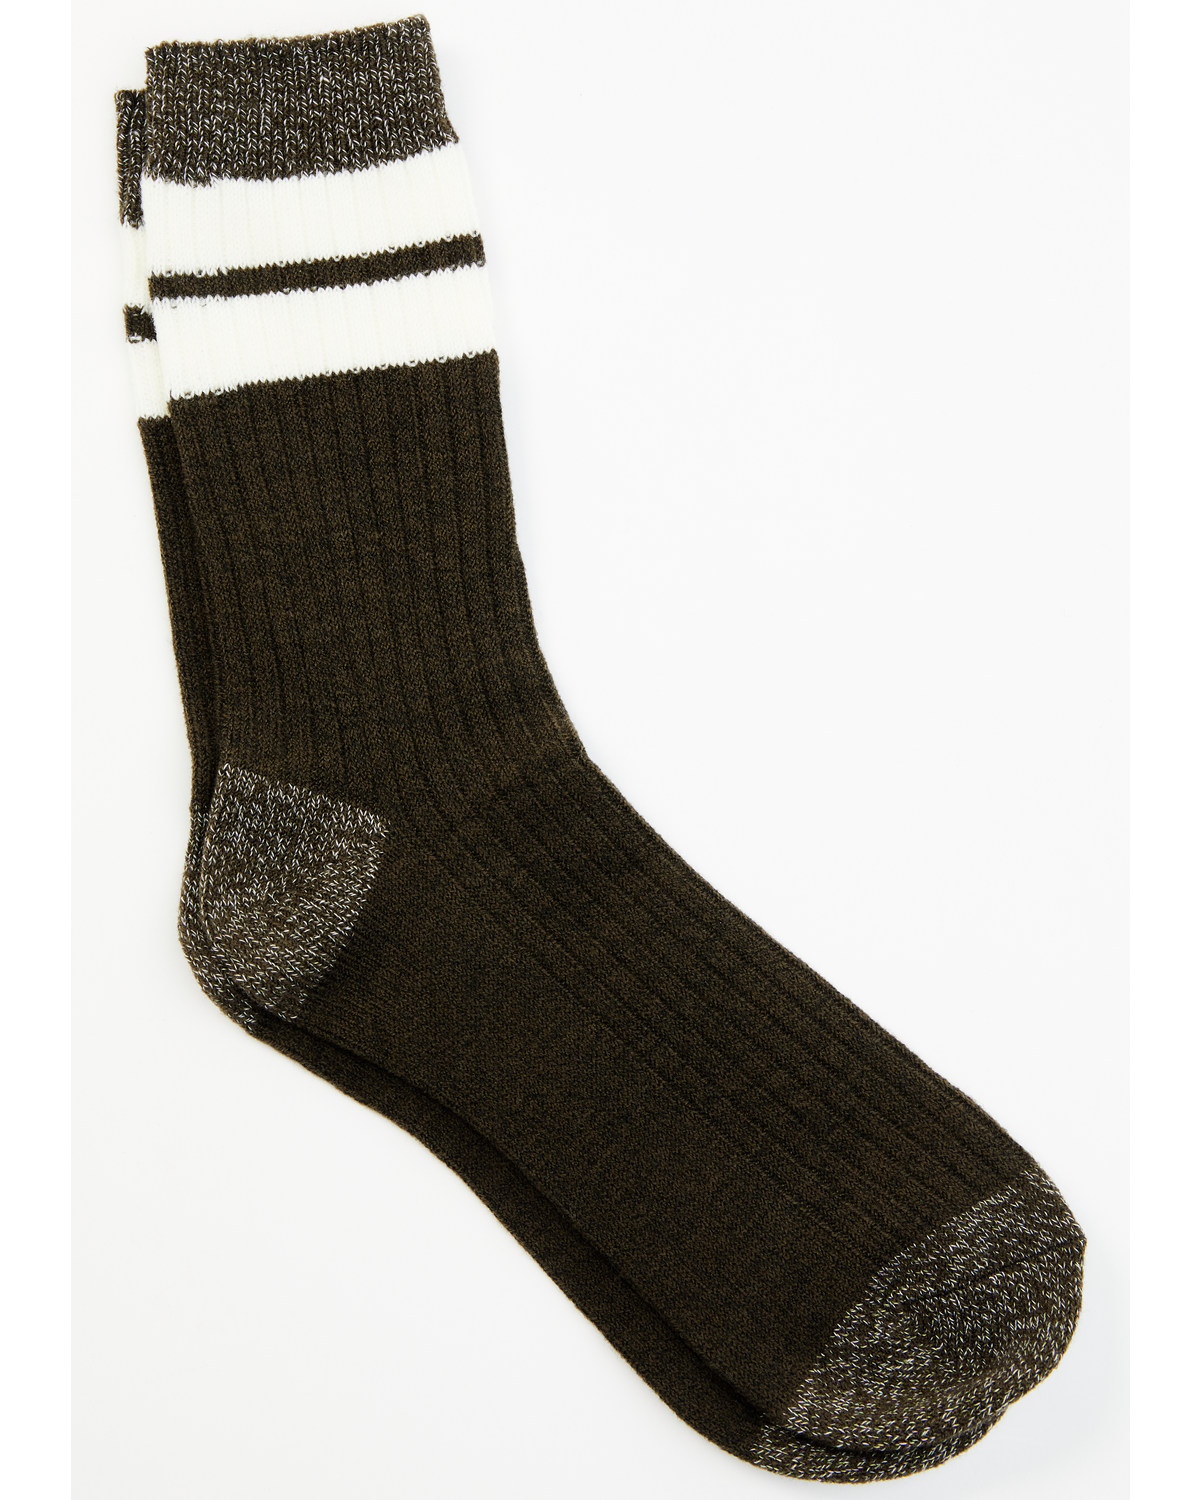 Brother's and Sons Men's Olive Rugby Stripe Crew Socks